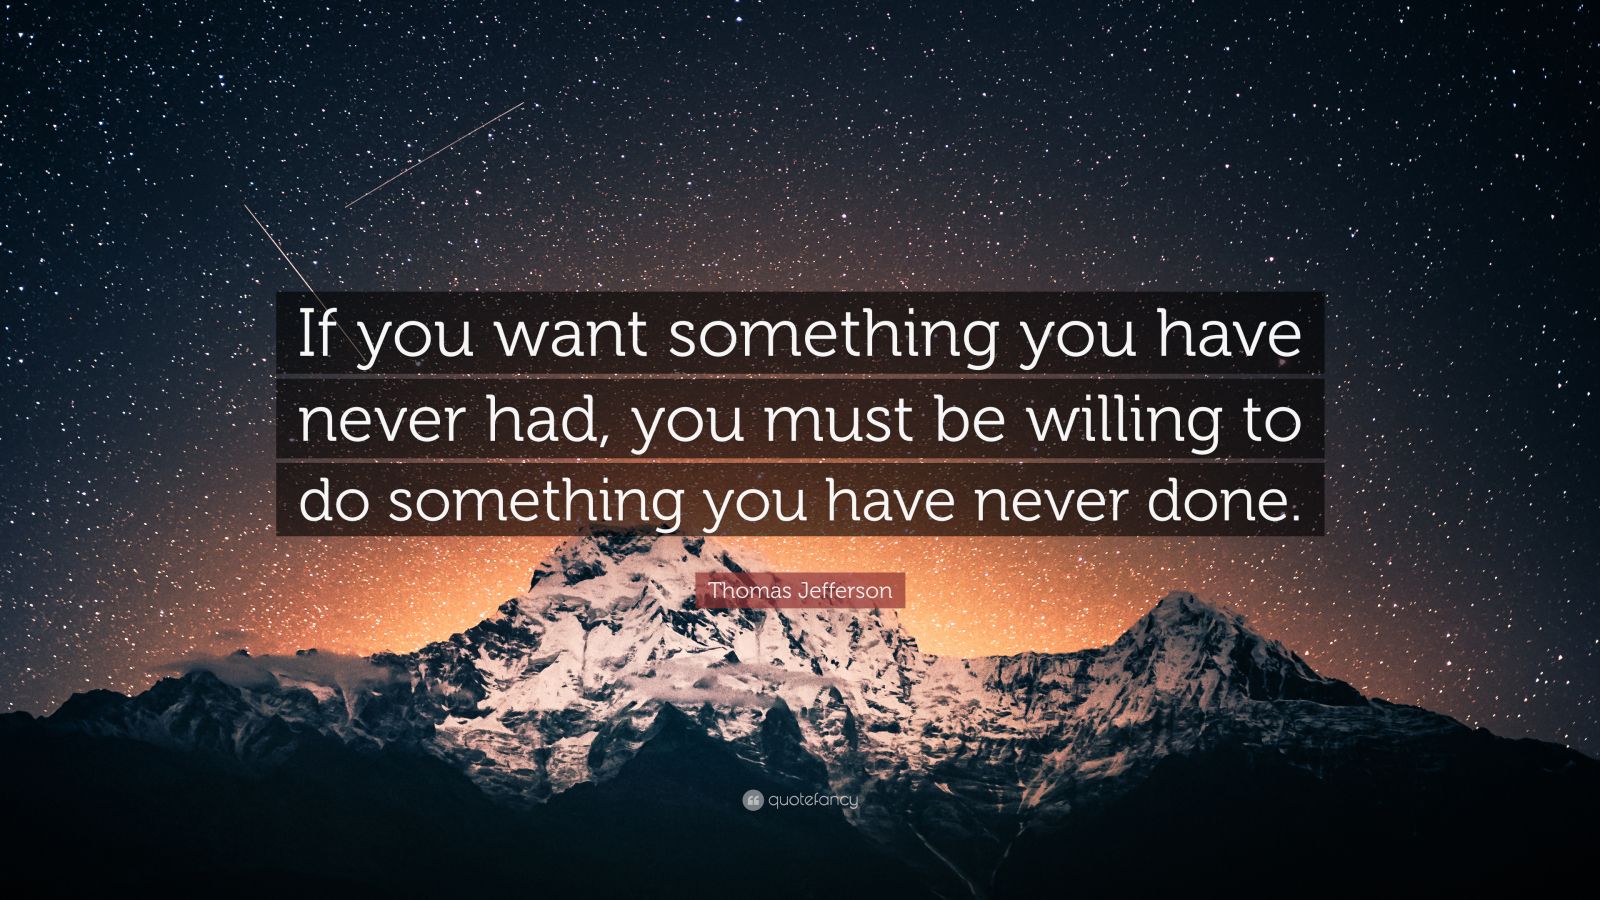 Thomas Jefferson Quote: “If you want something you have never had, you